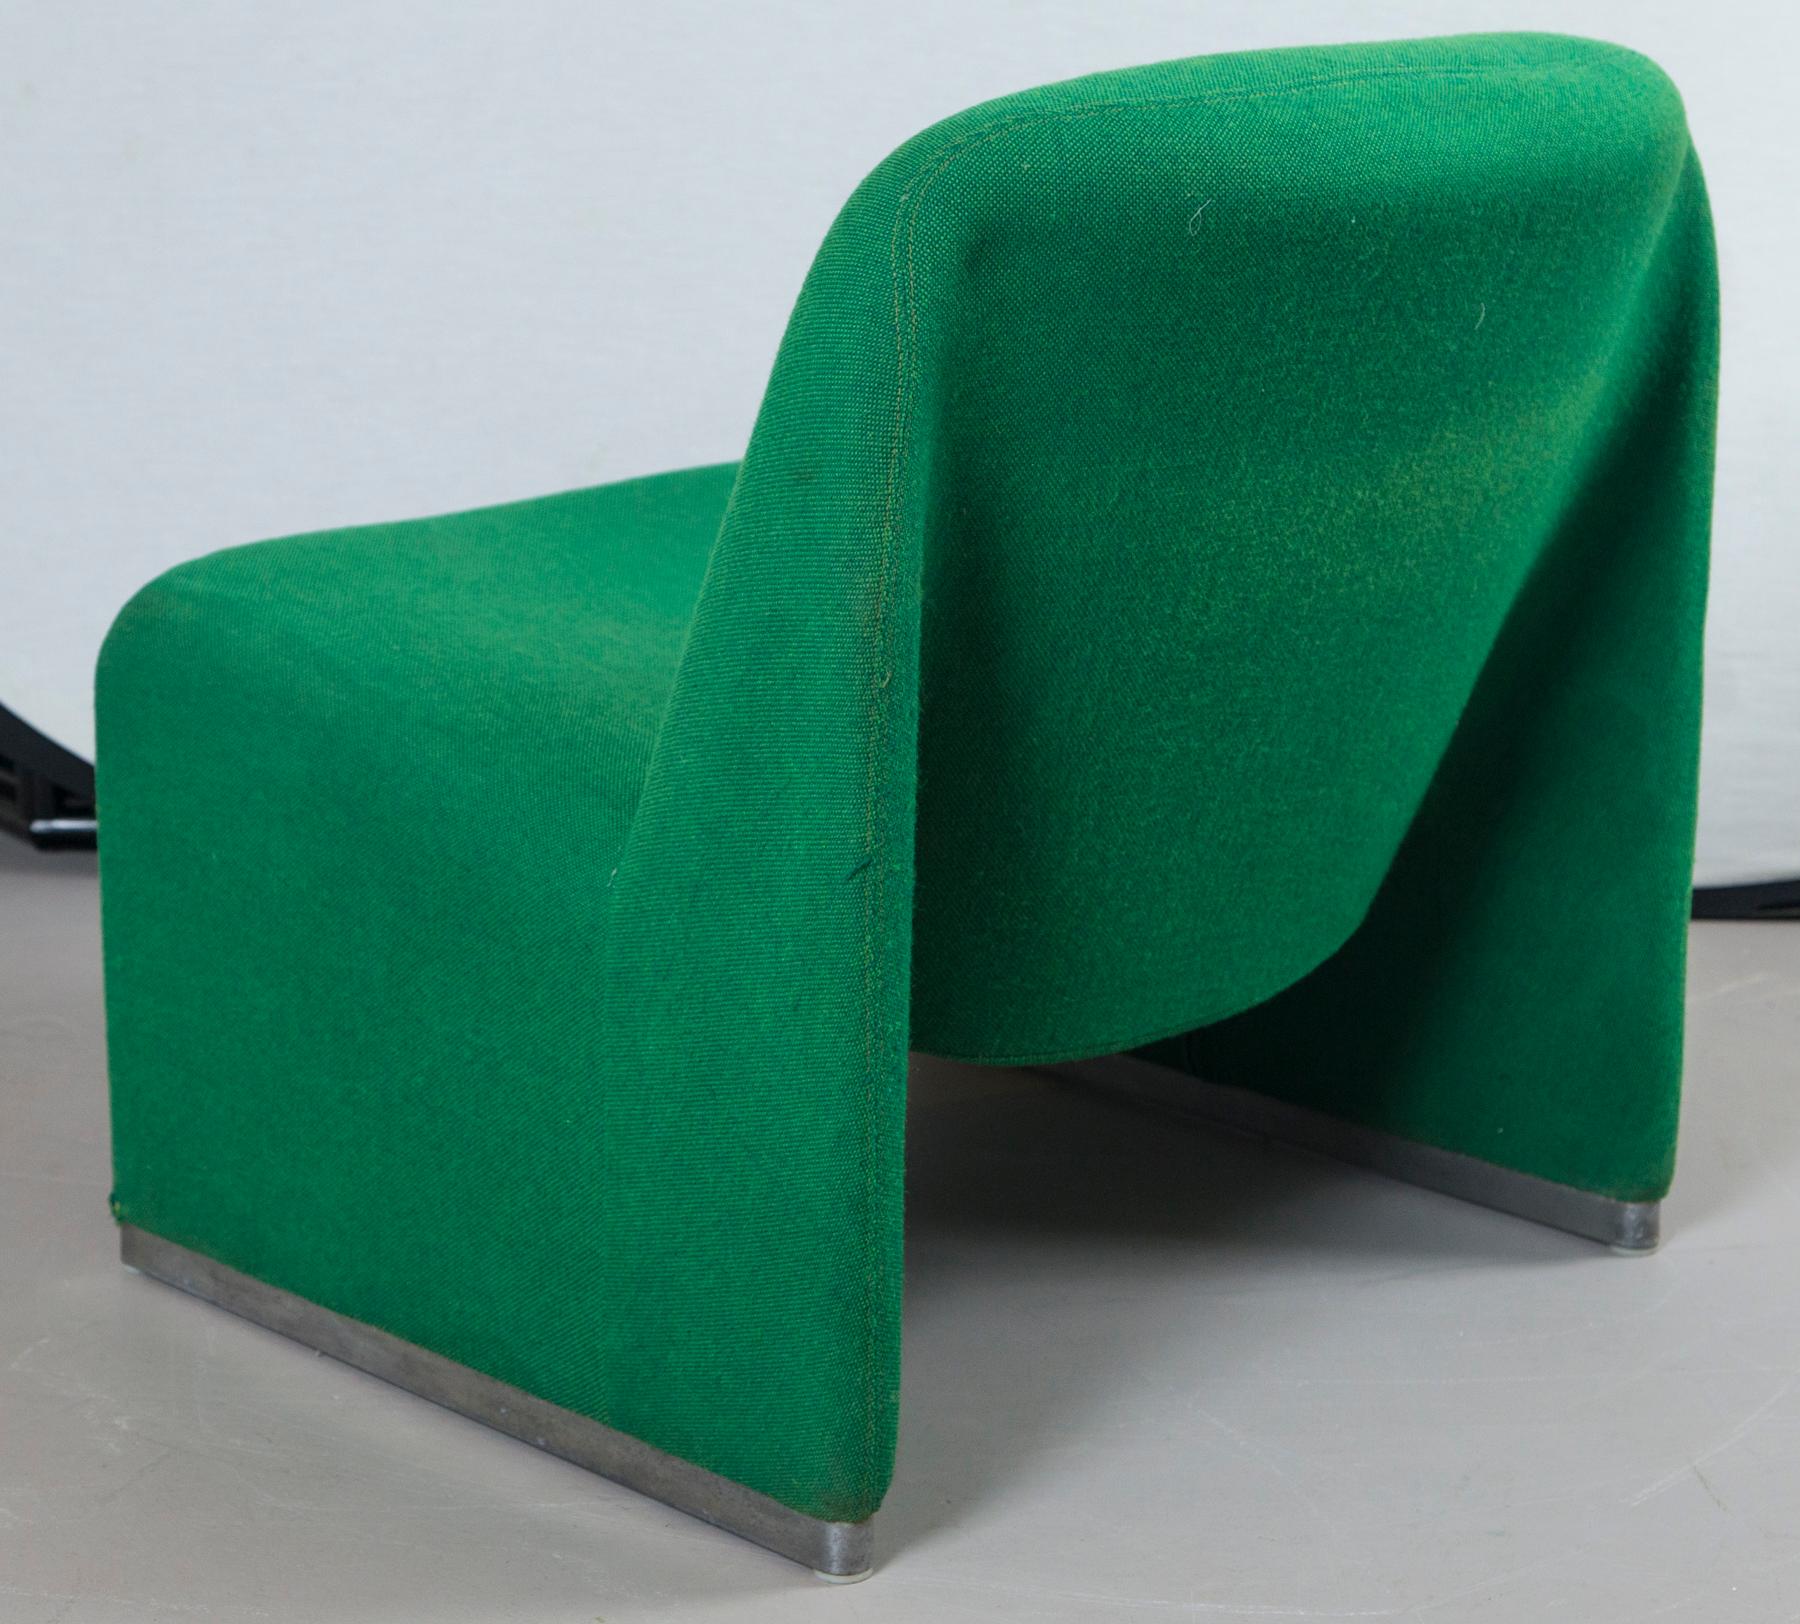 Italian Pair of Green Alky Chairs by Giancarlo Piretti for Castillo, 1970s